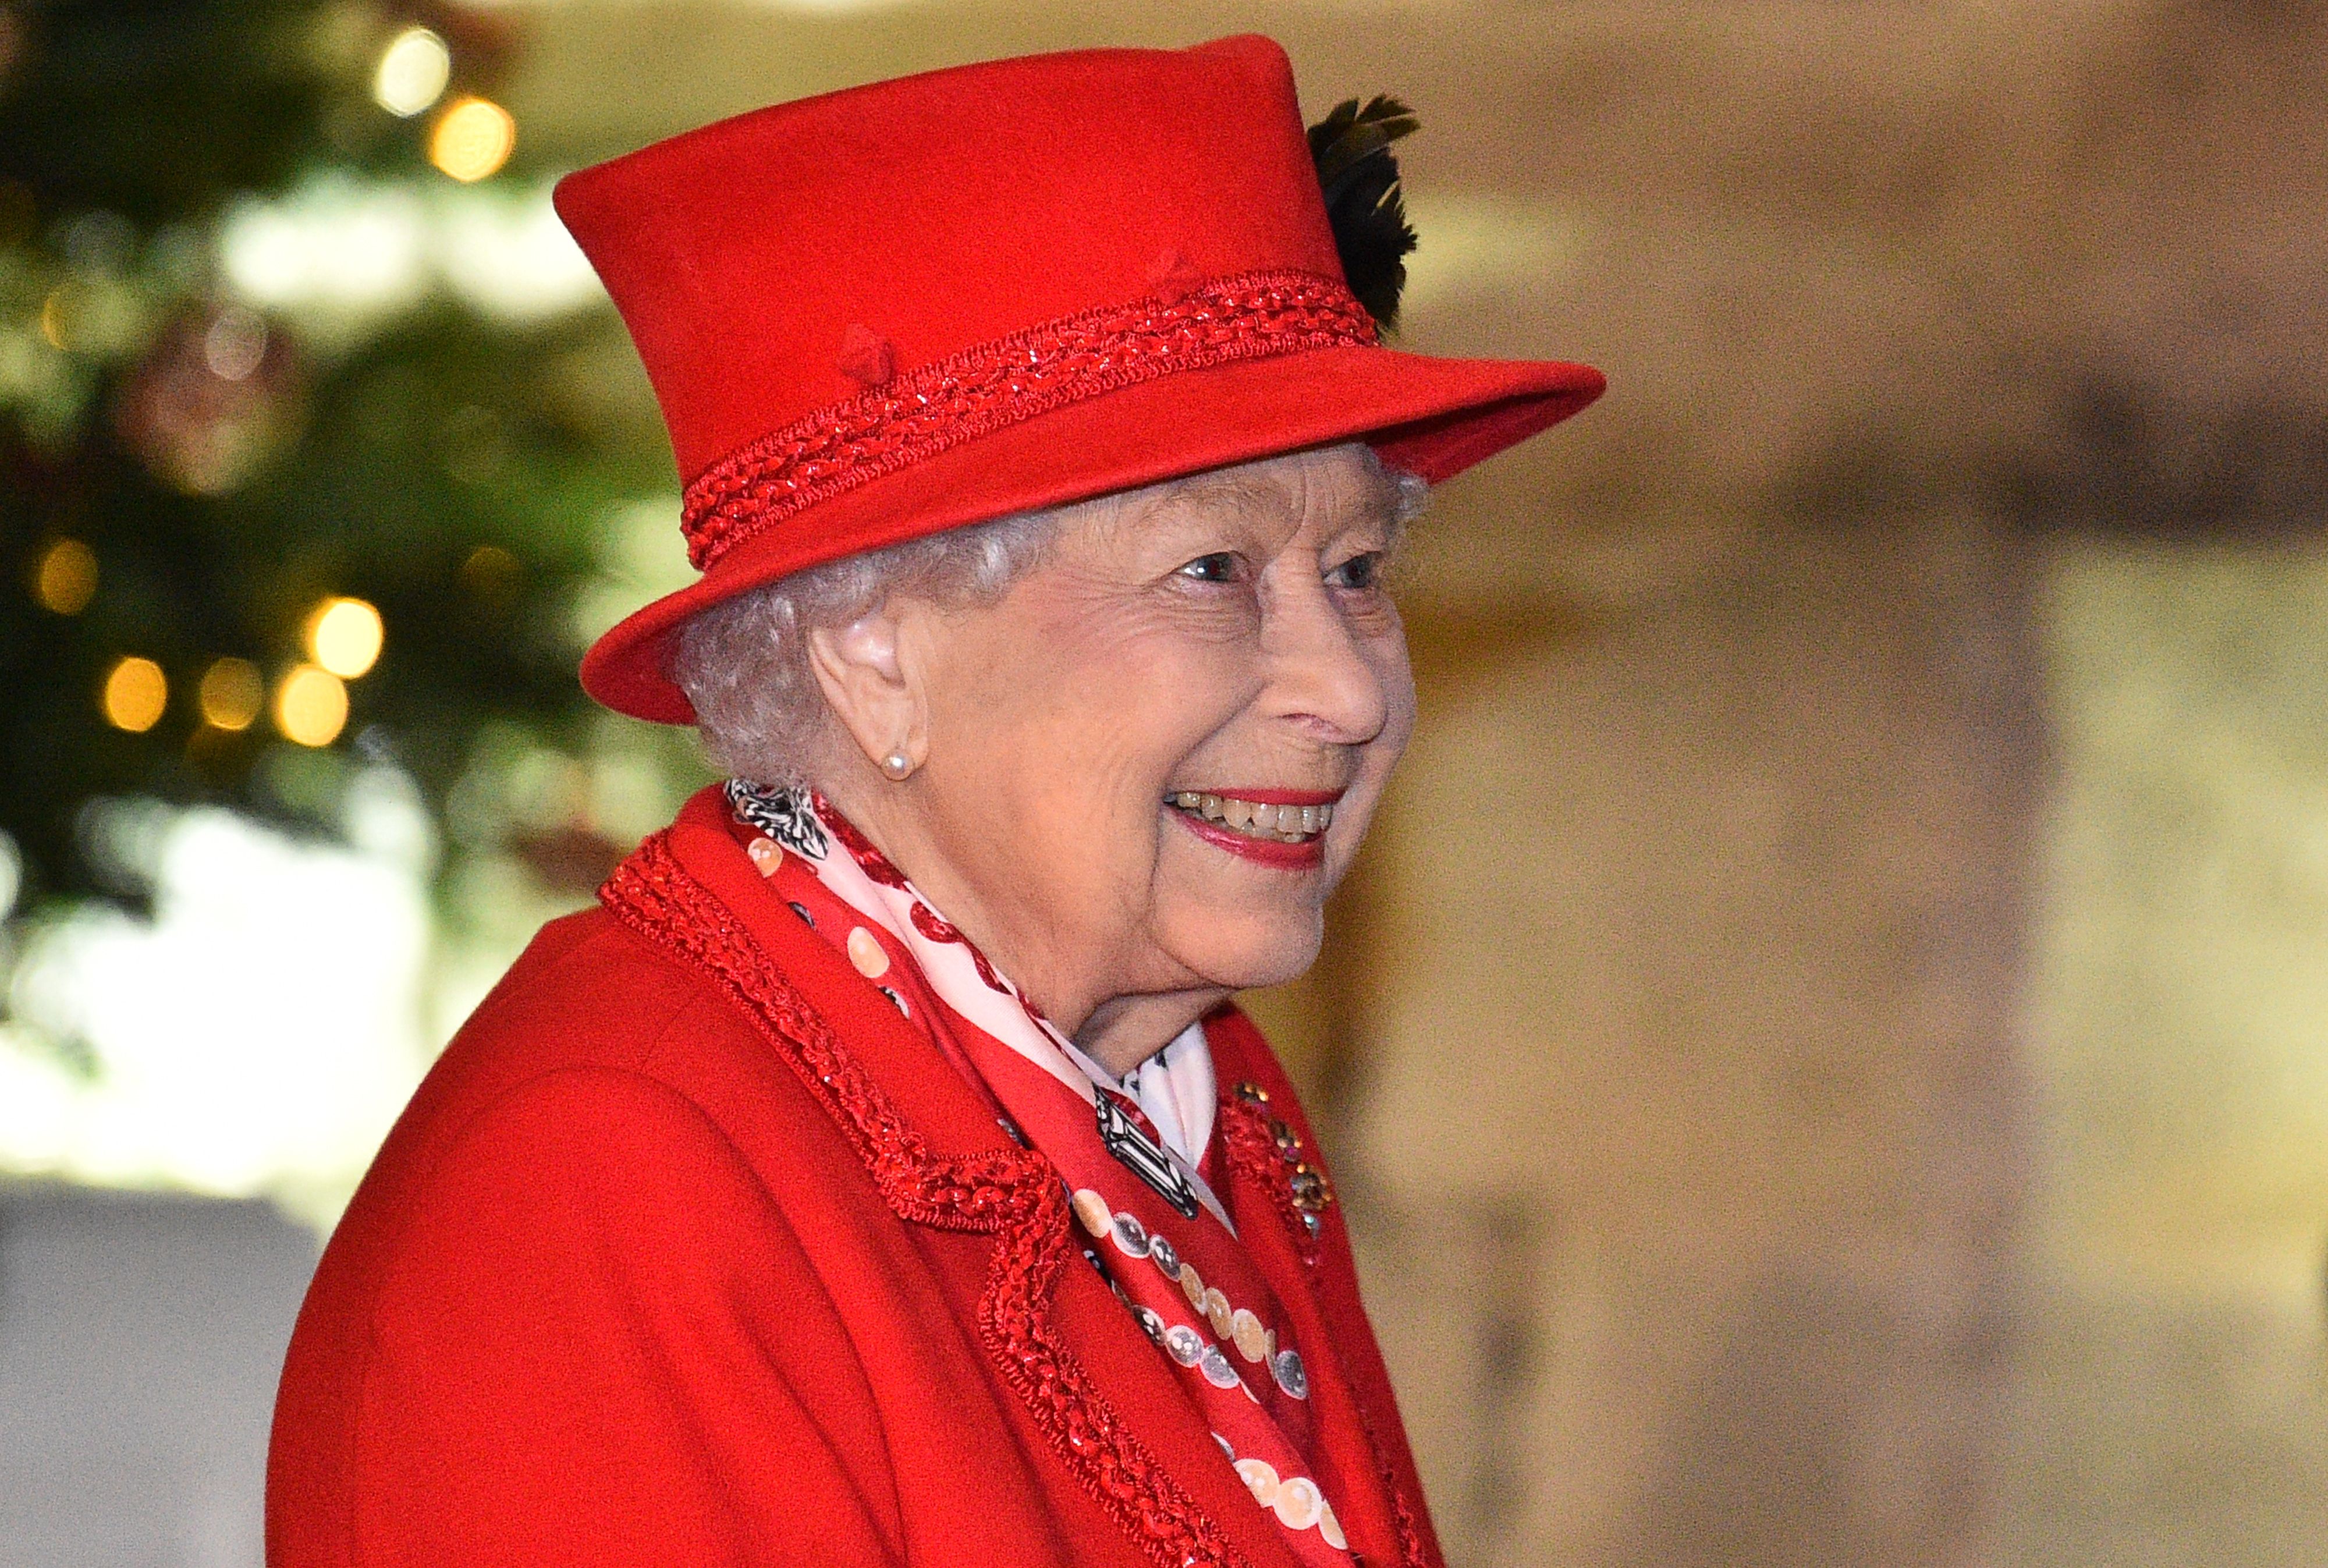  Queen Elizabeth II thanks local volunteers and key workers for the work they are doing during the coronavirus pandemic and over Christmas in the quadrangle of Windsor Castle on December 8, 2020 | Getty Images